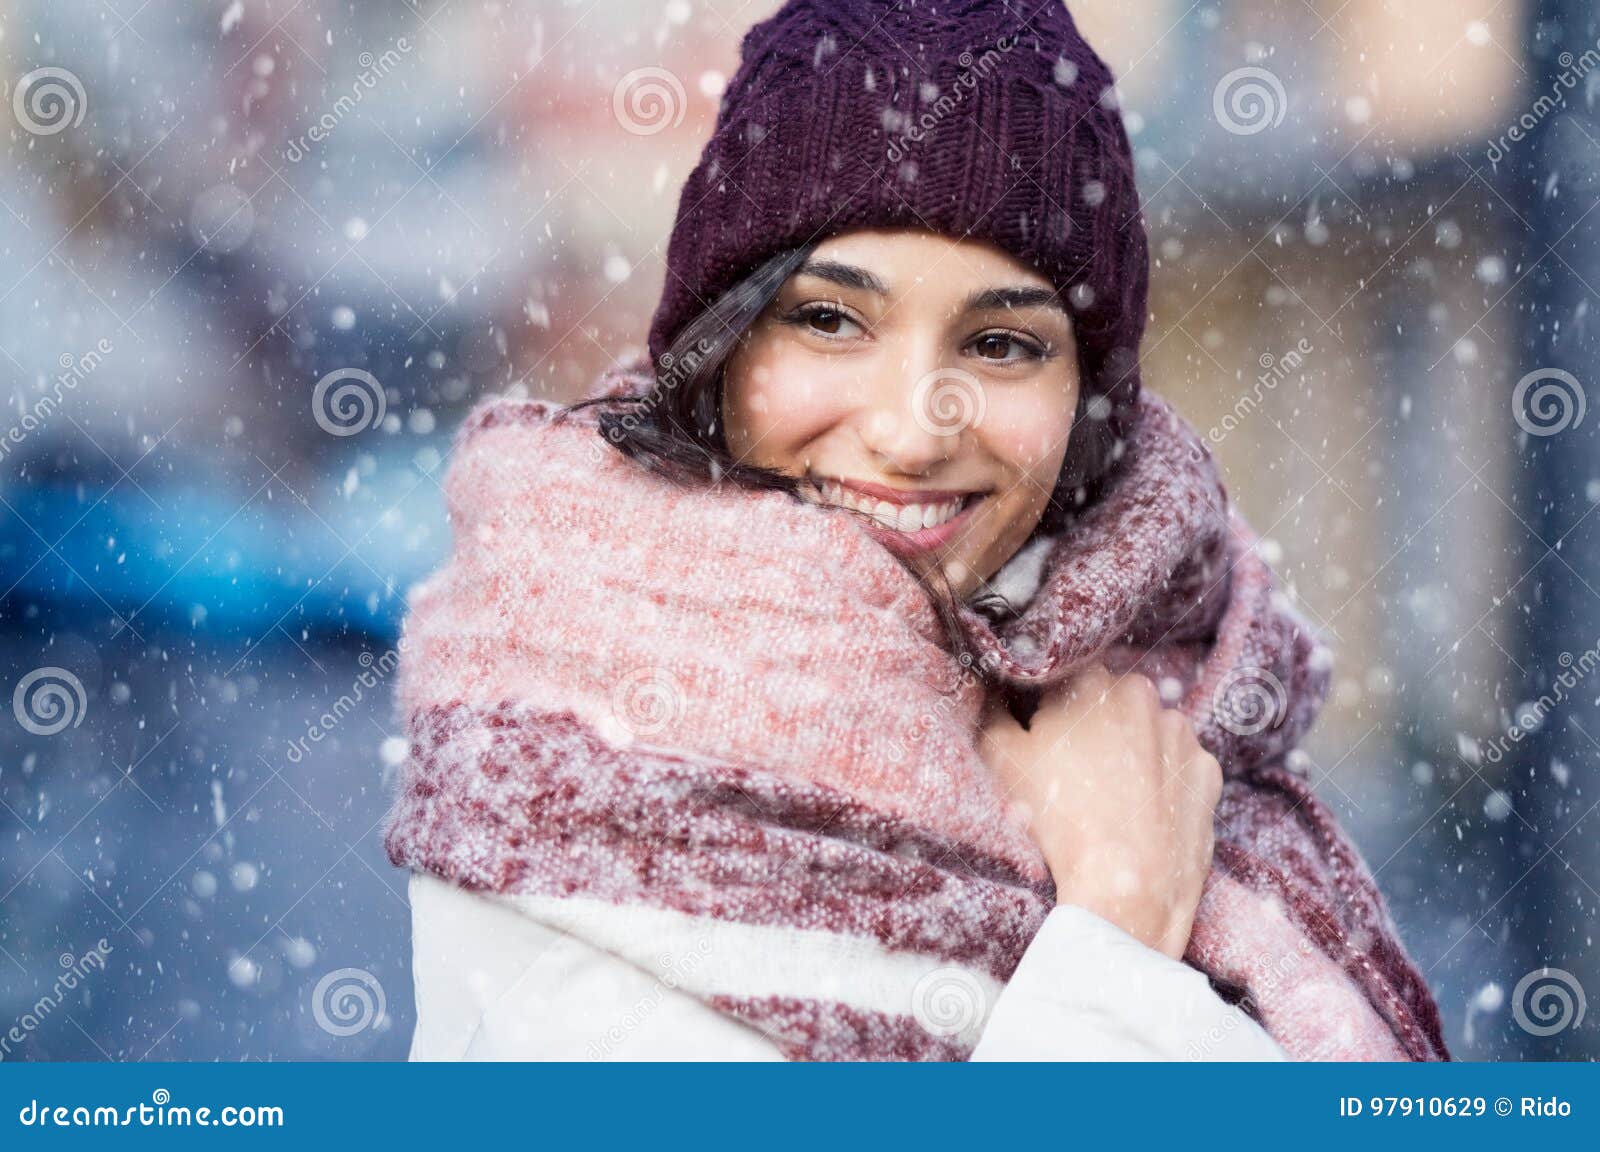 Woman in snowy winter stock image. Image of warm, clothing - 97910629